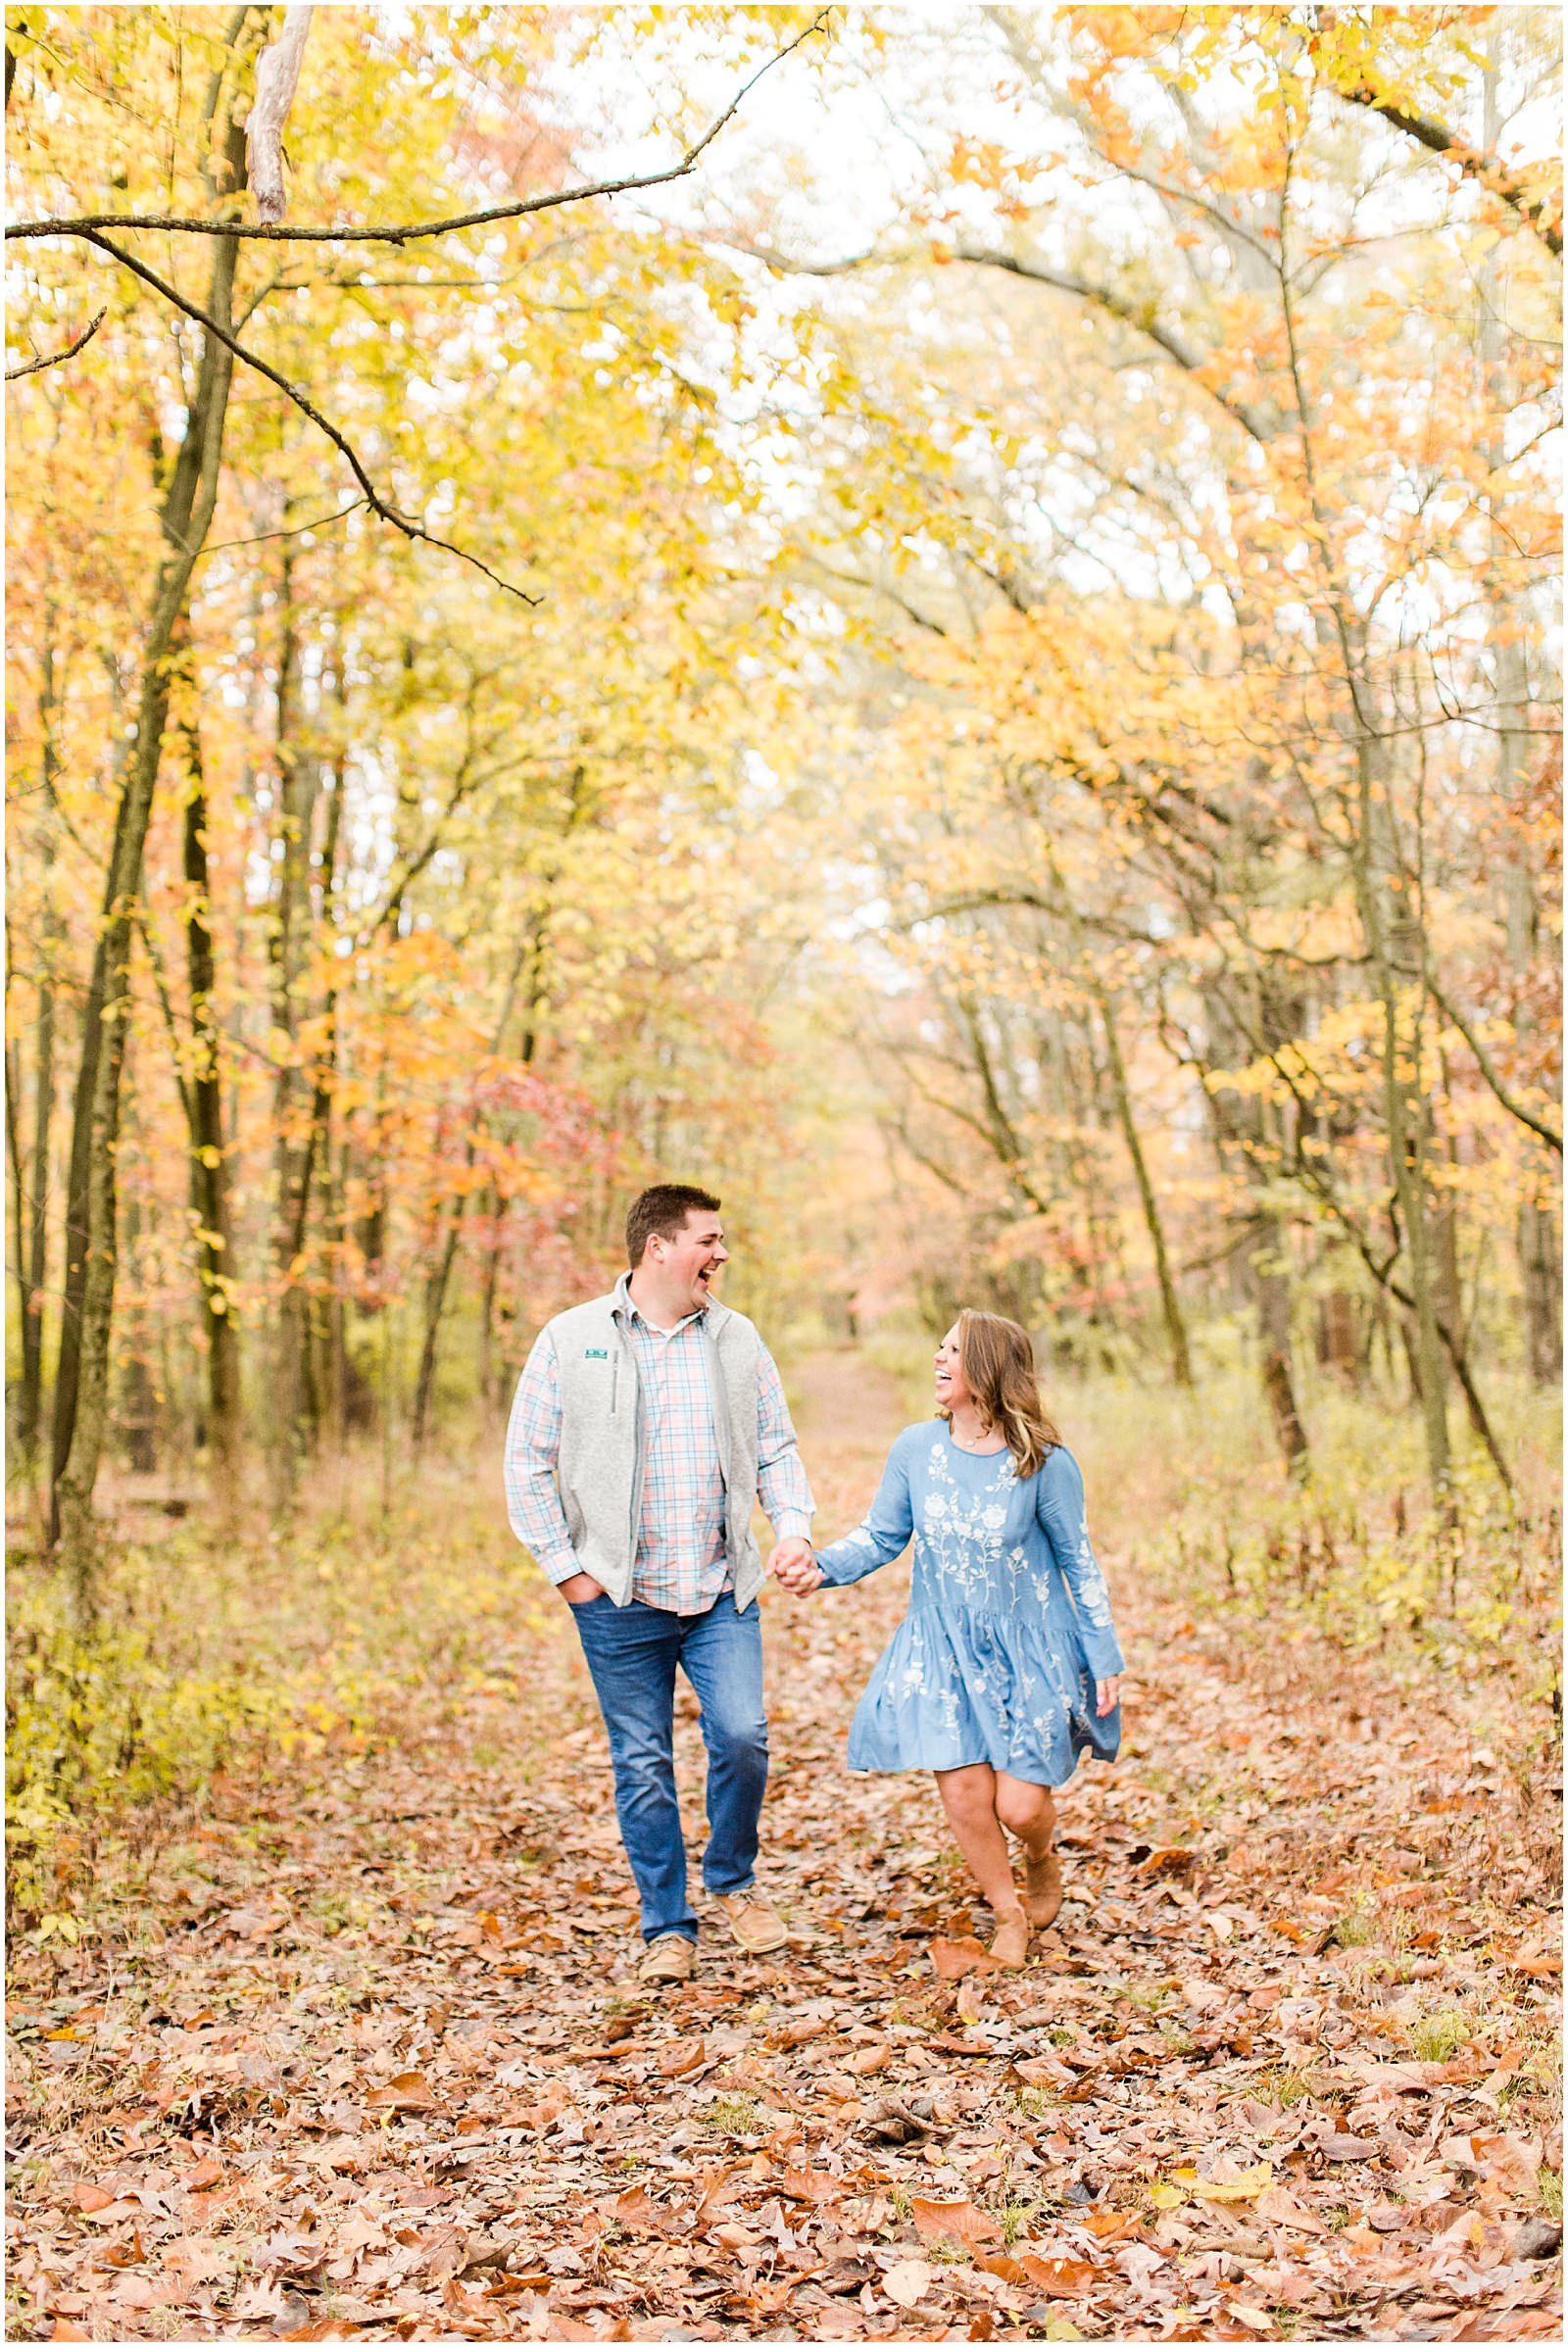 A Southern Illinois Engagement Session | Roxanne and Matthew | Bret and Brandie Photography 0041.jpg